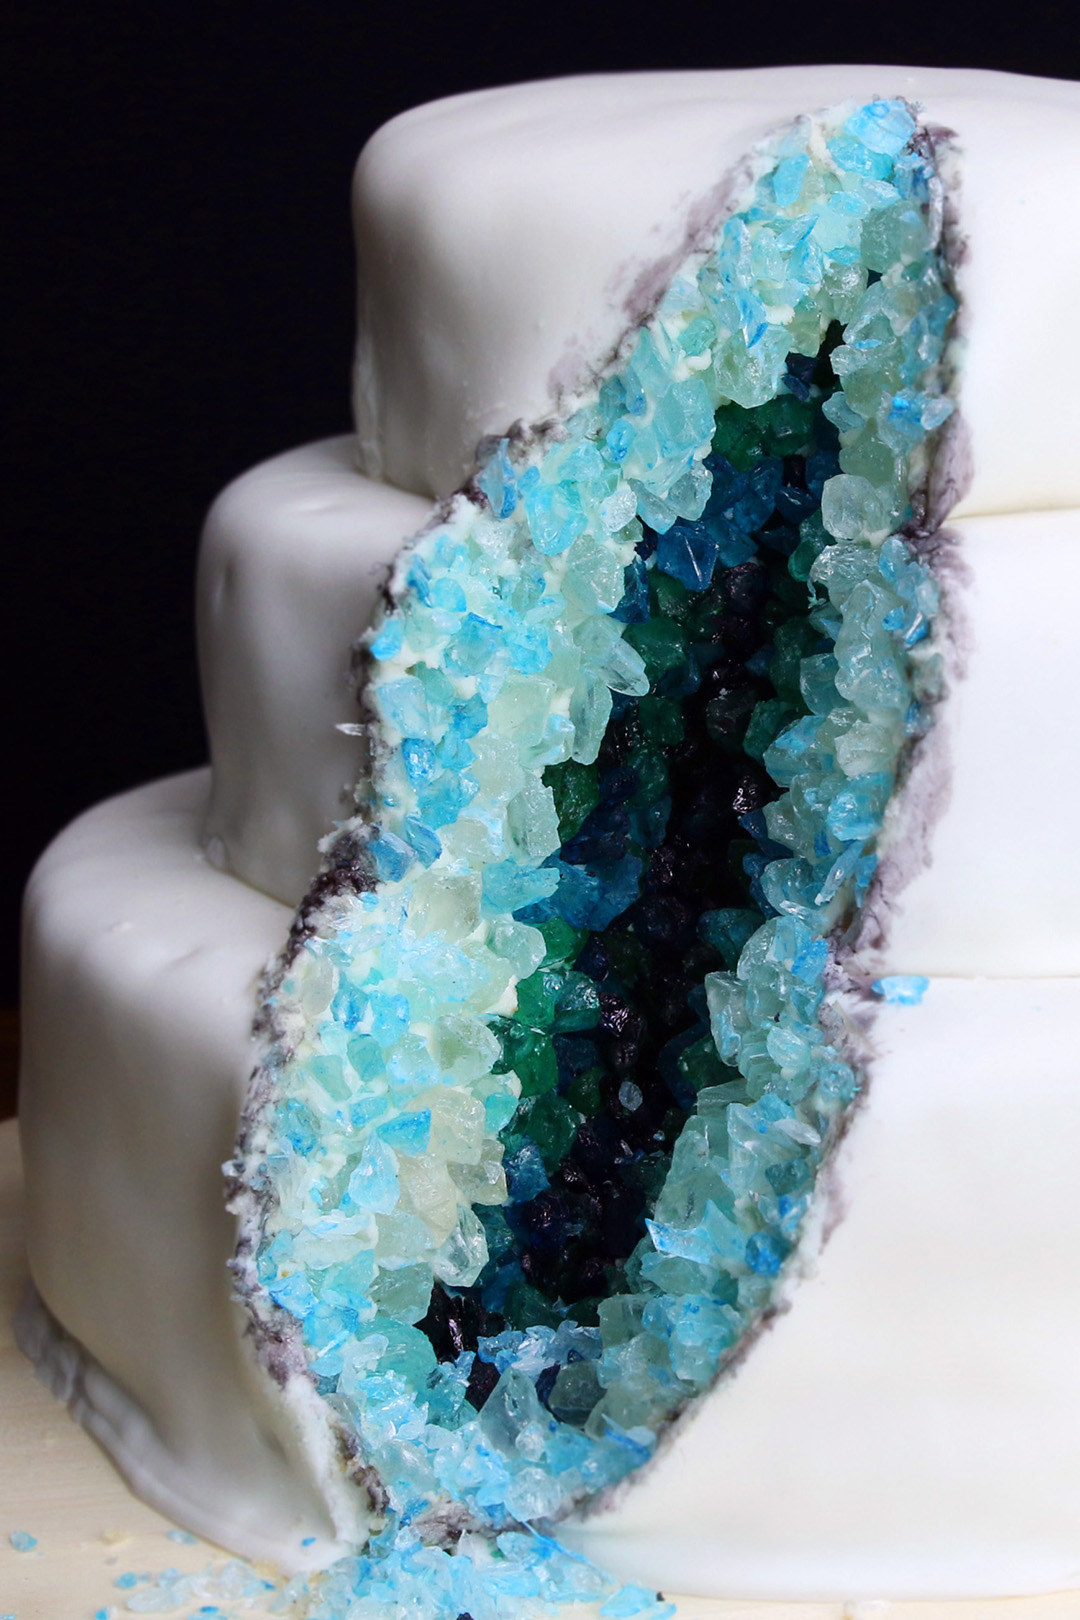 Natural Geode Cake  French Bread Cakes  Pastries